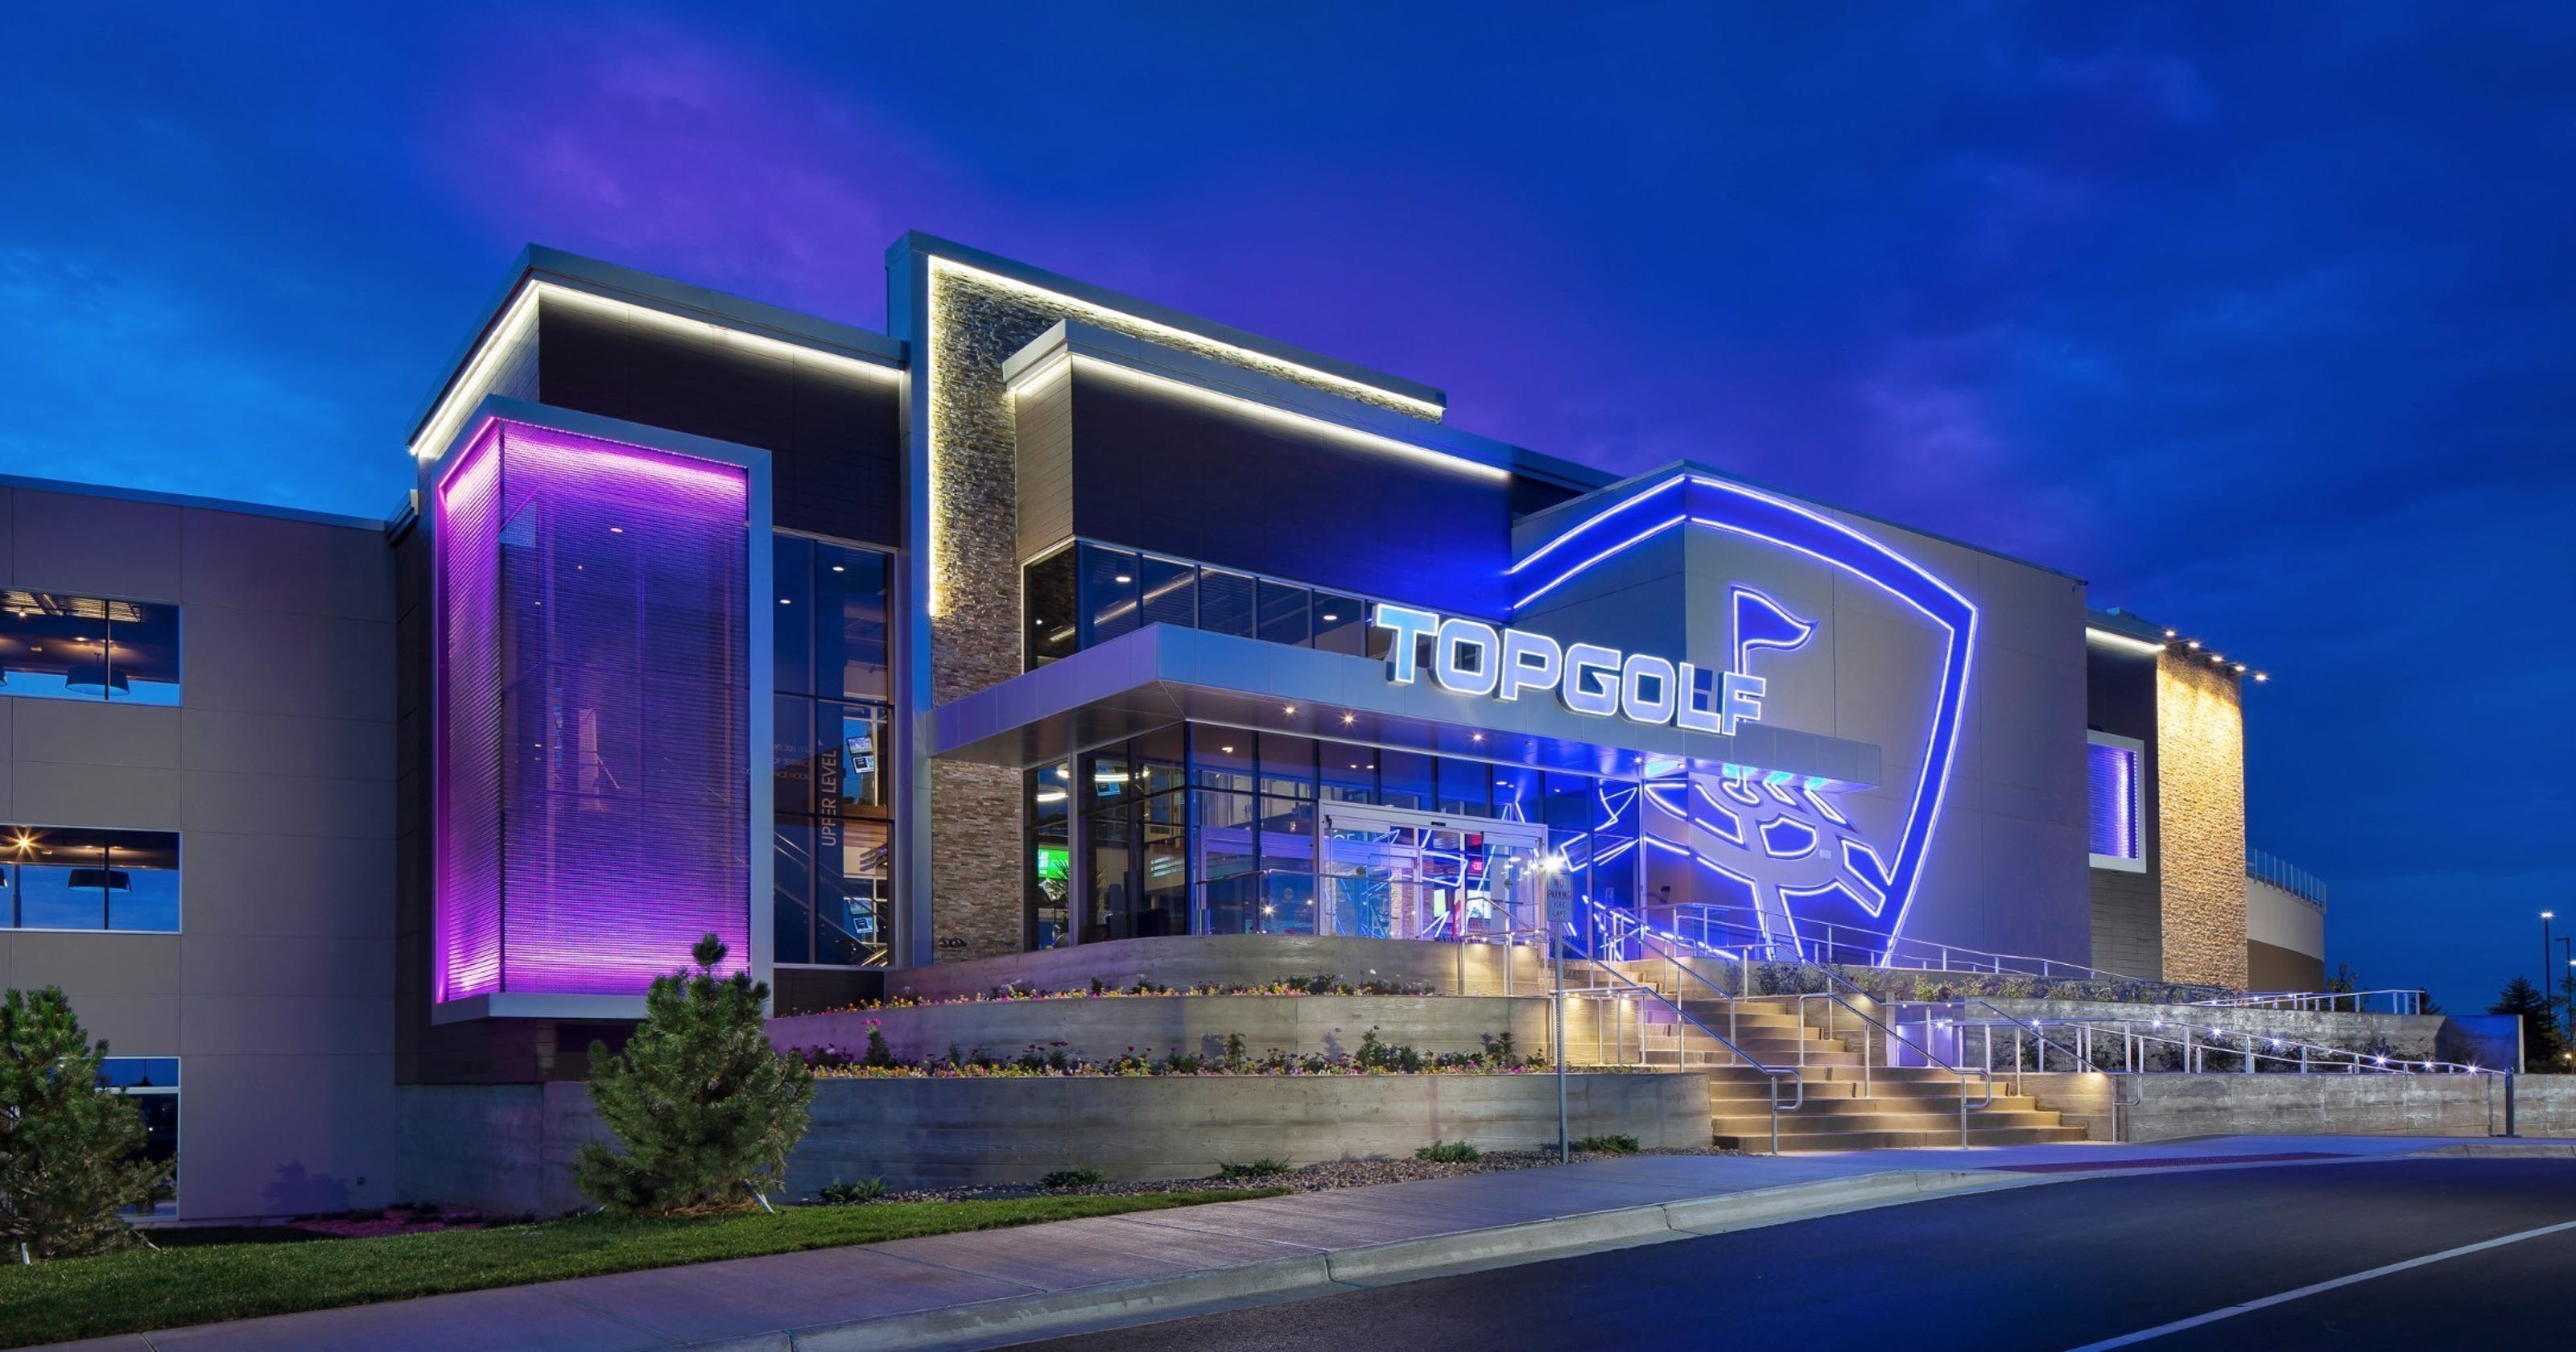 Topgolf Auburn Hills to open in time for holiday parties